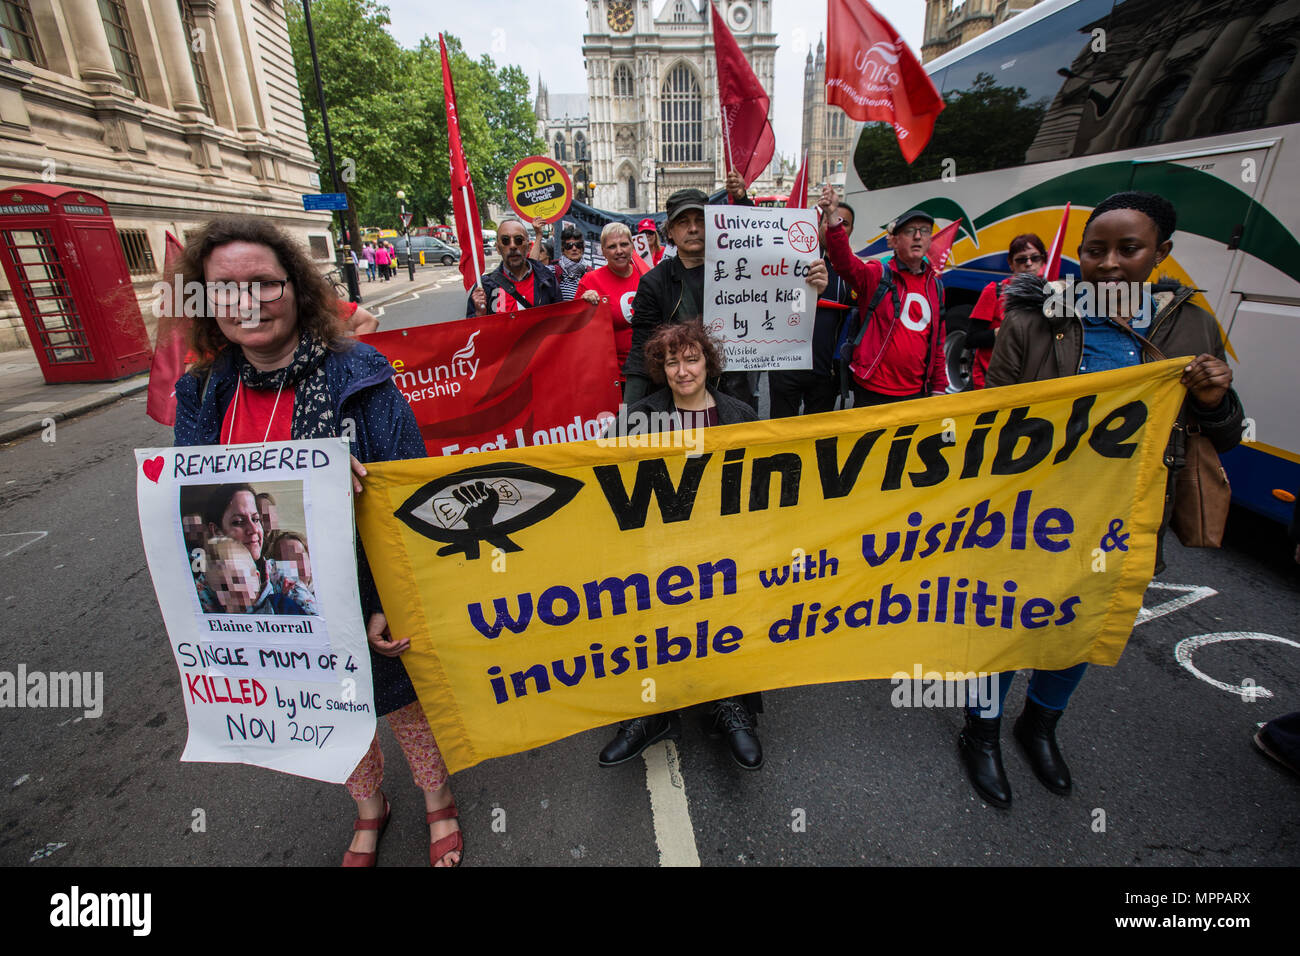 London, UK. 24 May, 2018. Protesters demonstrating outside Parliament during The Unite union’s national day of action against the Governments all-in-one benefit, Universal Credit. David Rowe/Alamy Live News Stock Photo